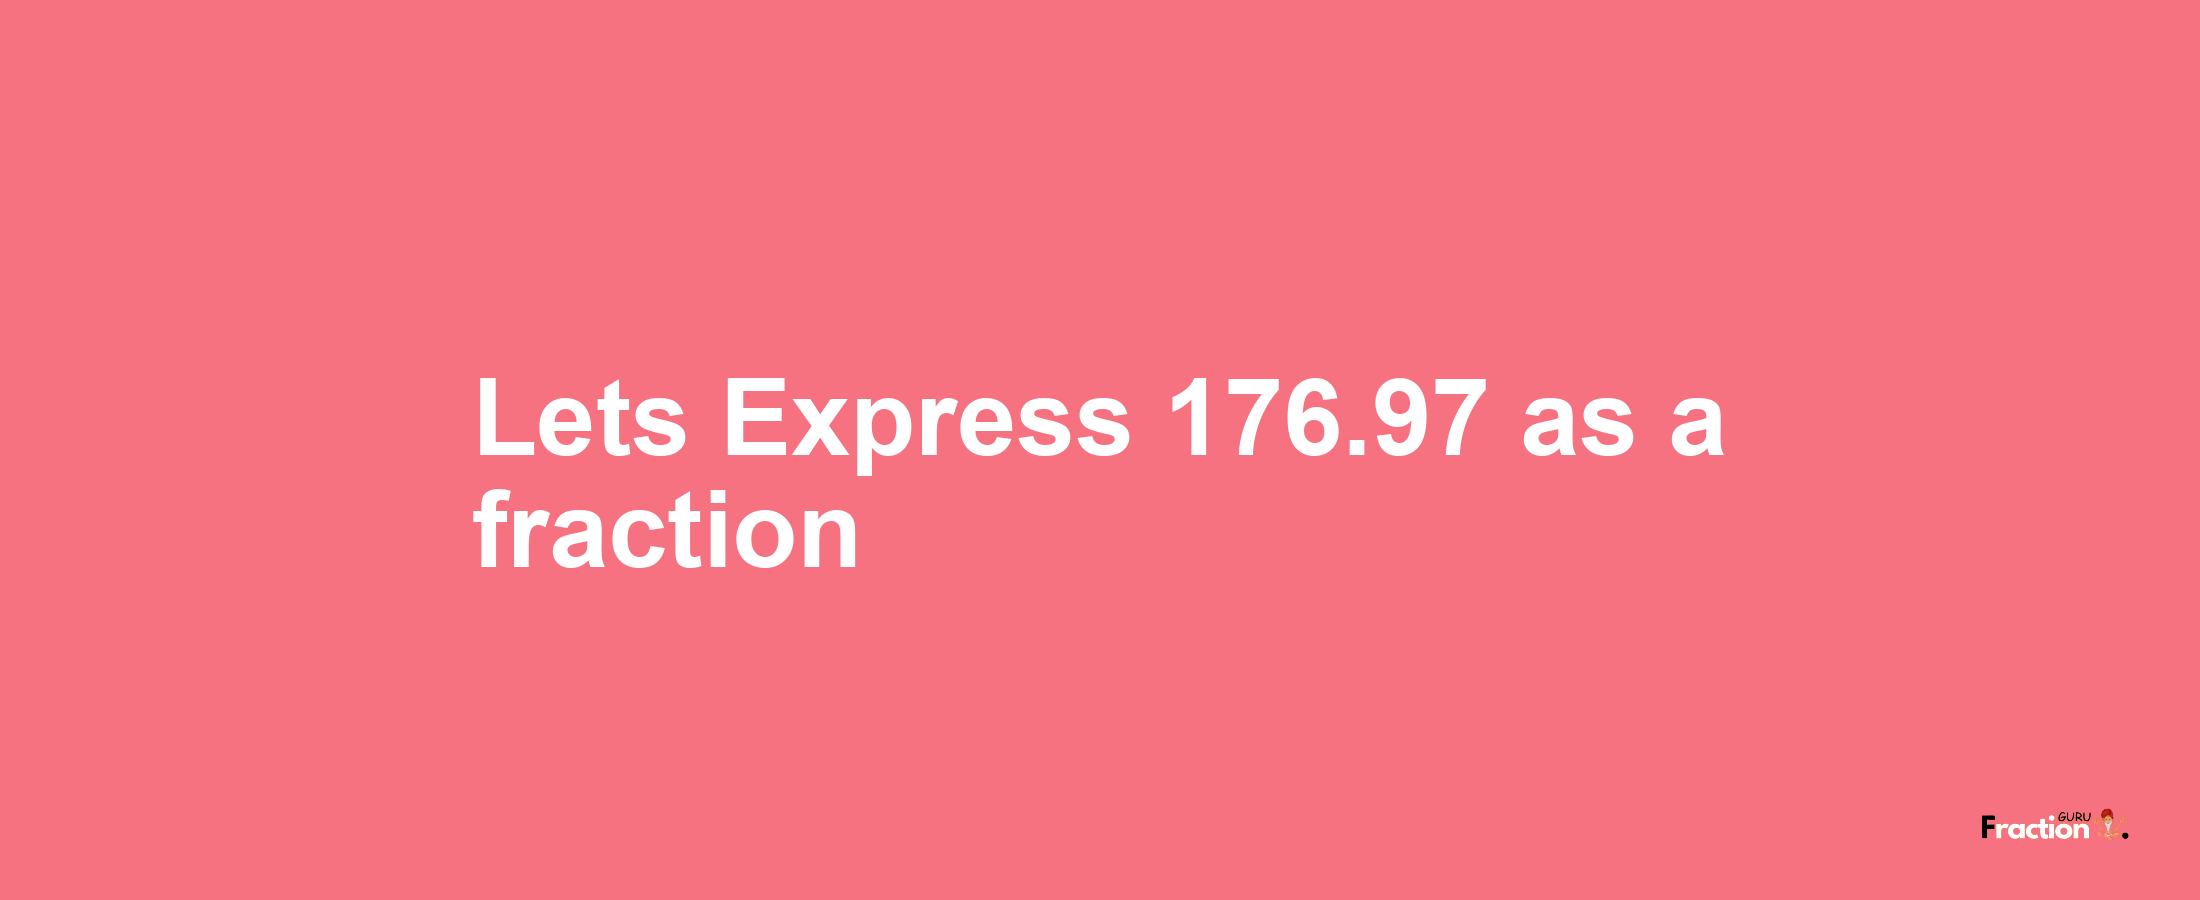 Lets Express 176.97 as afraction